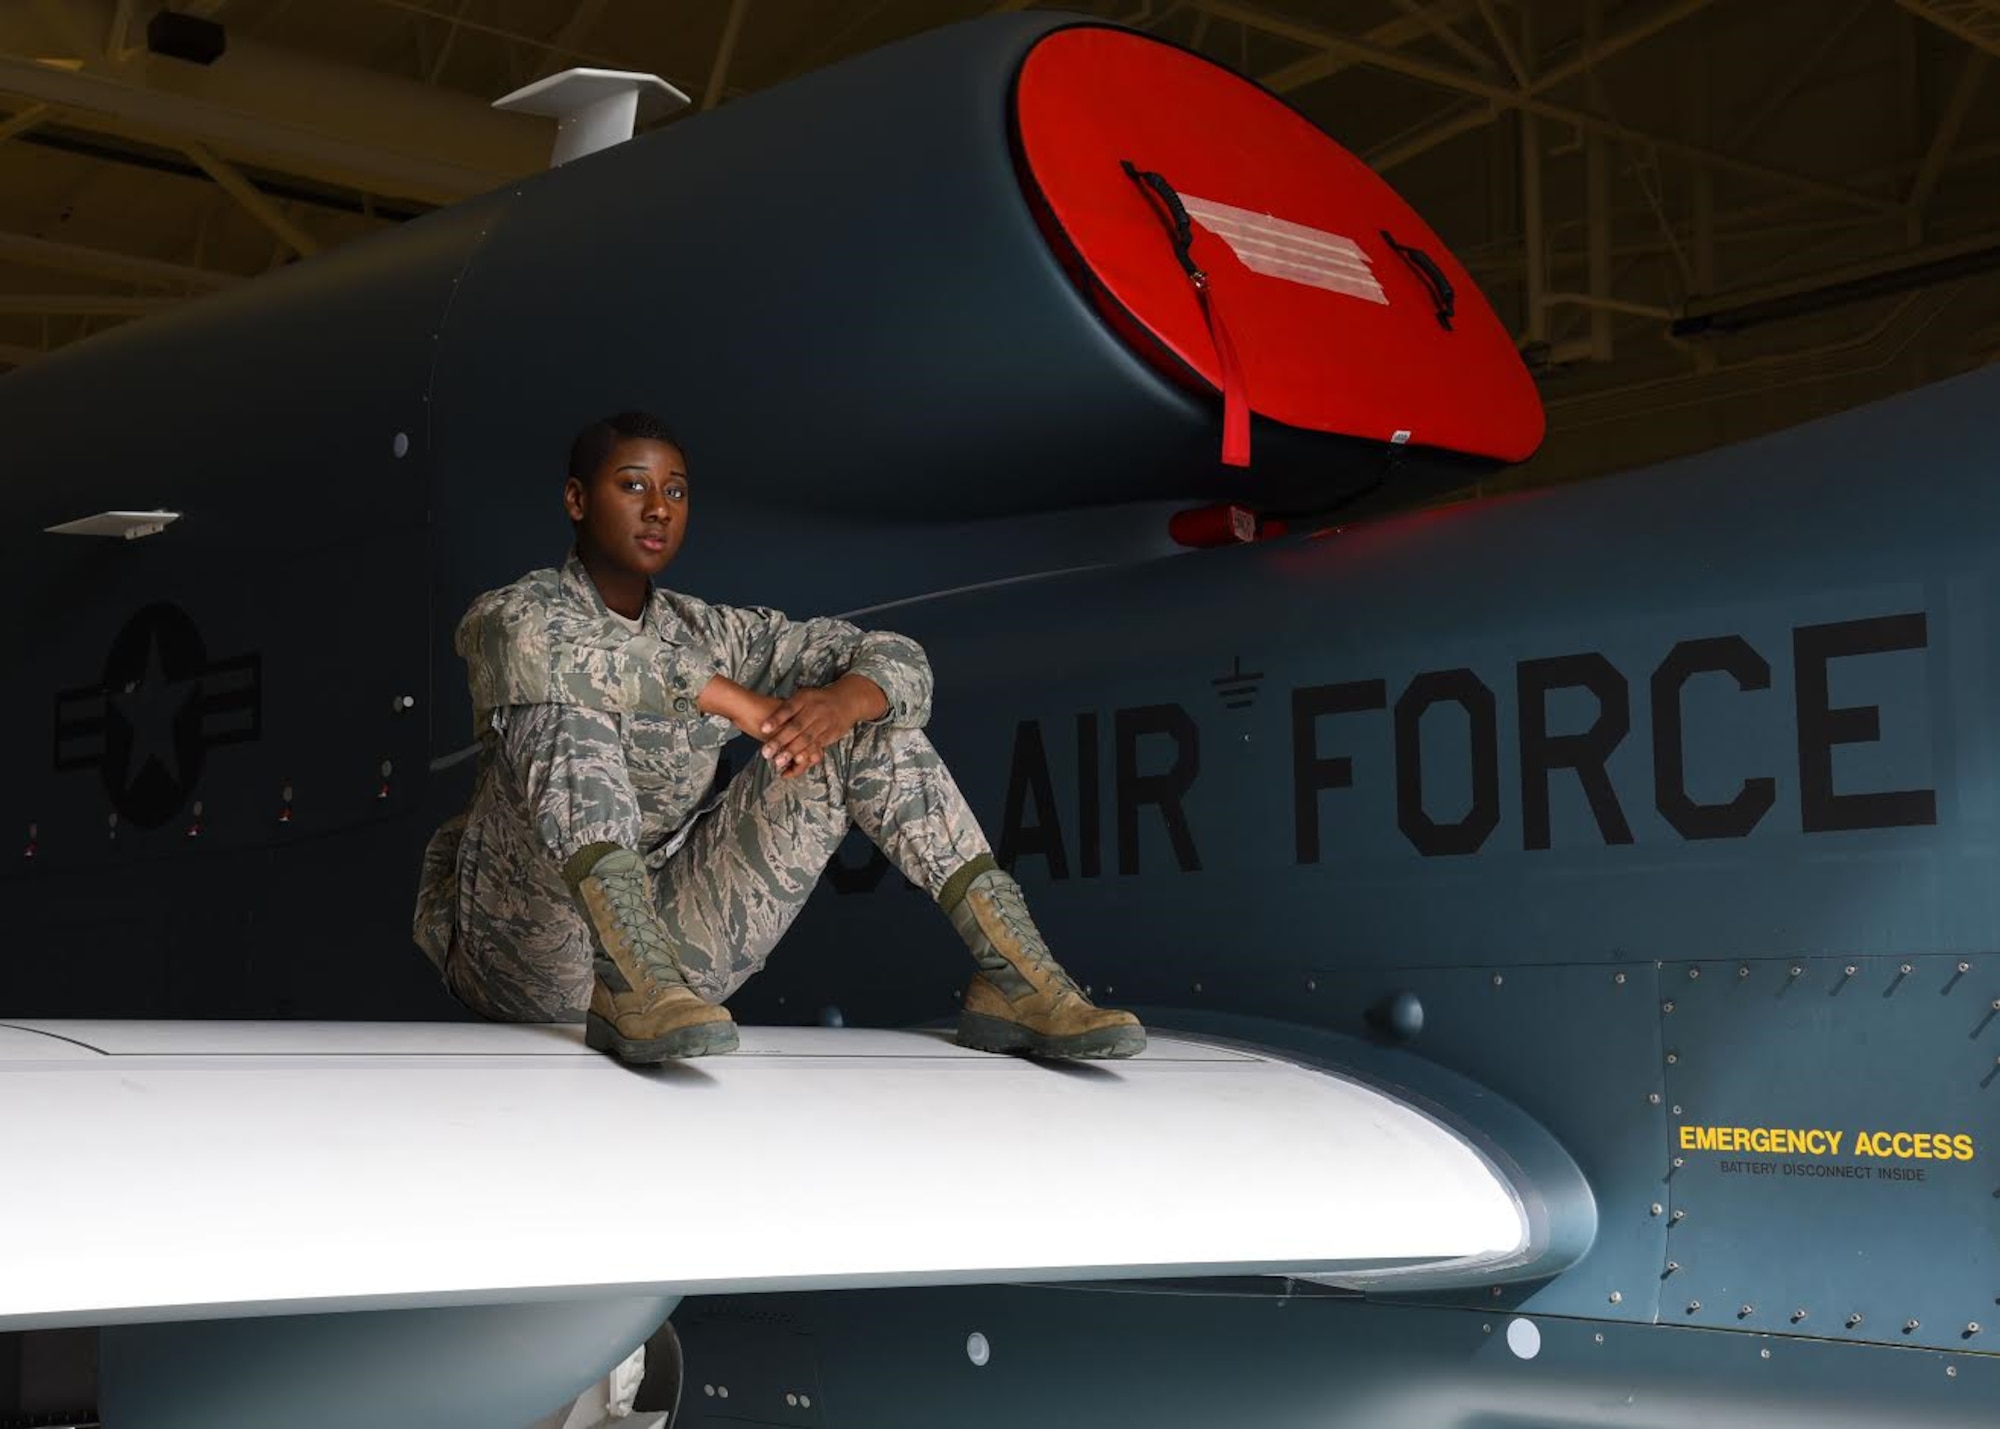 Airman 1st Class Celeste Black, a crew chief with the 69th Maintenance Group, demonstrates how strong the wings of the RQ-4 Global Hawk are by sitting on one at Grand Forks Air Force Base, N.D. March 28, 2017. Black said she has yet to deploy to work on the Global Hawk overseas because of her fight with cancer, but hopes to be able to soon. (U.S. Air Force photo by Airman 1st Class Elora J. McCutcheon